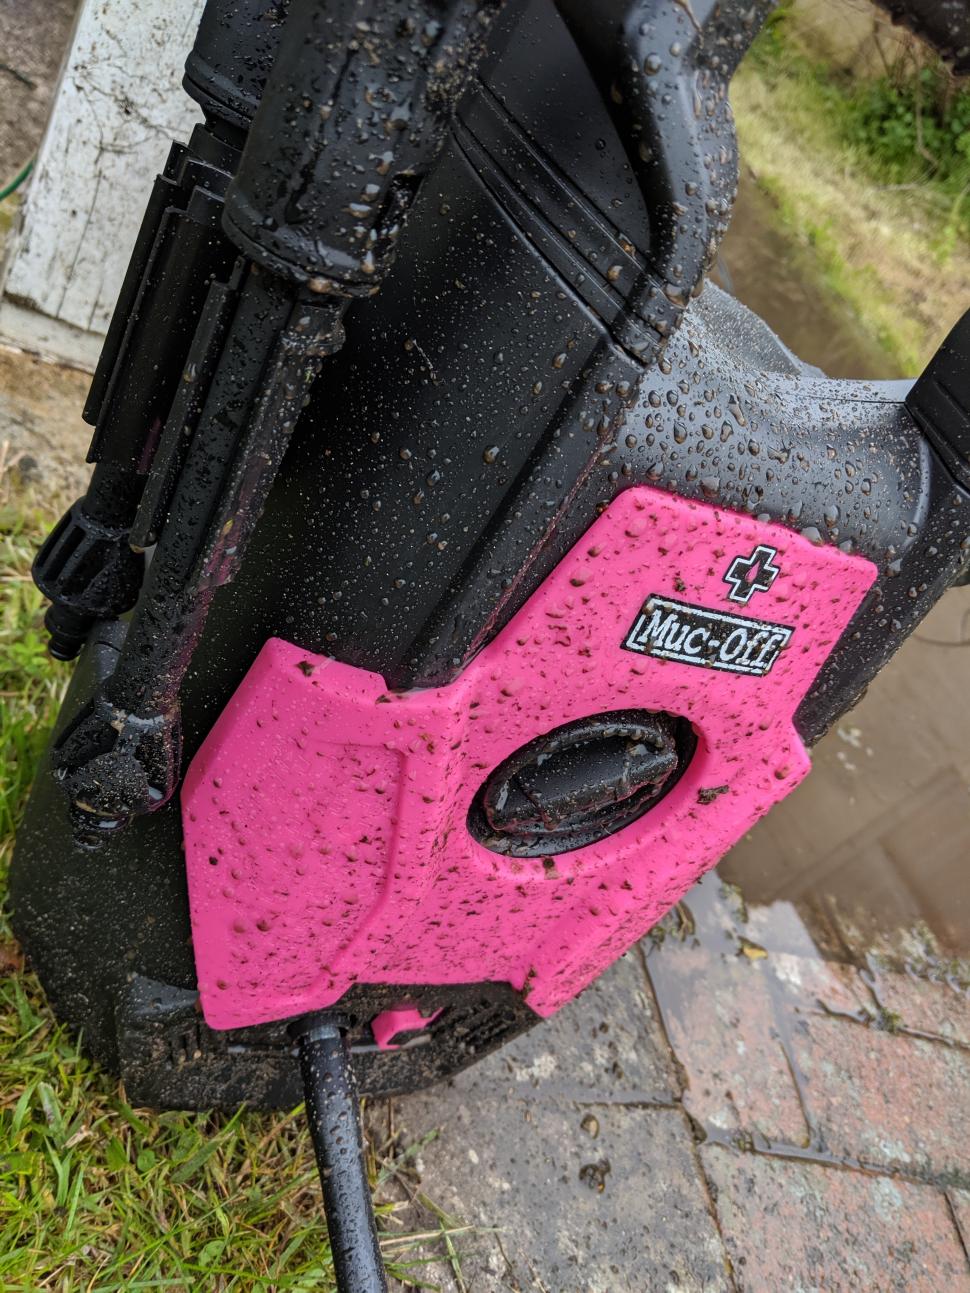 Muc-Off Pressure Washer Review  Hilariously effective tool that's